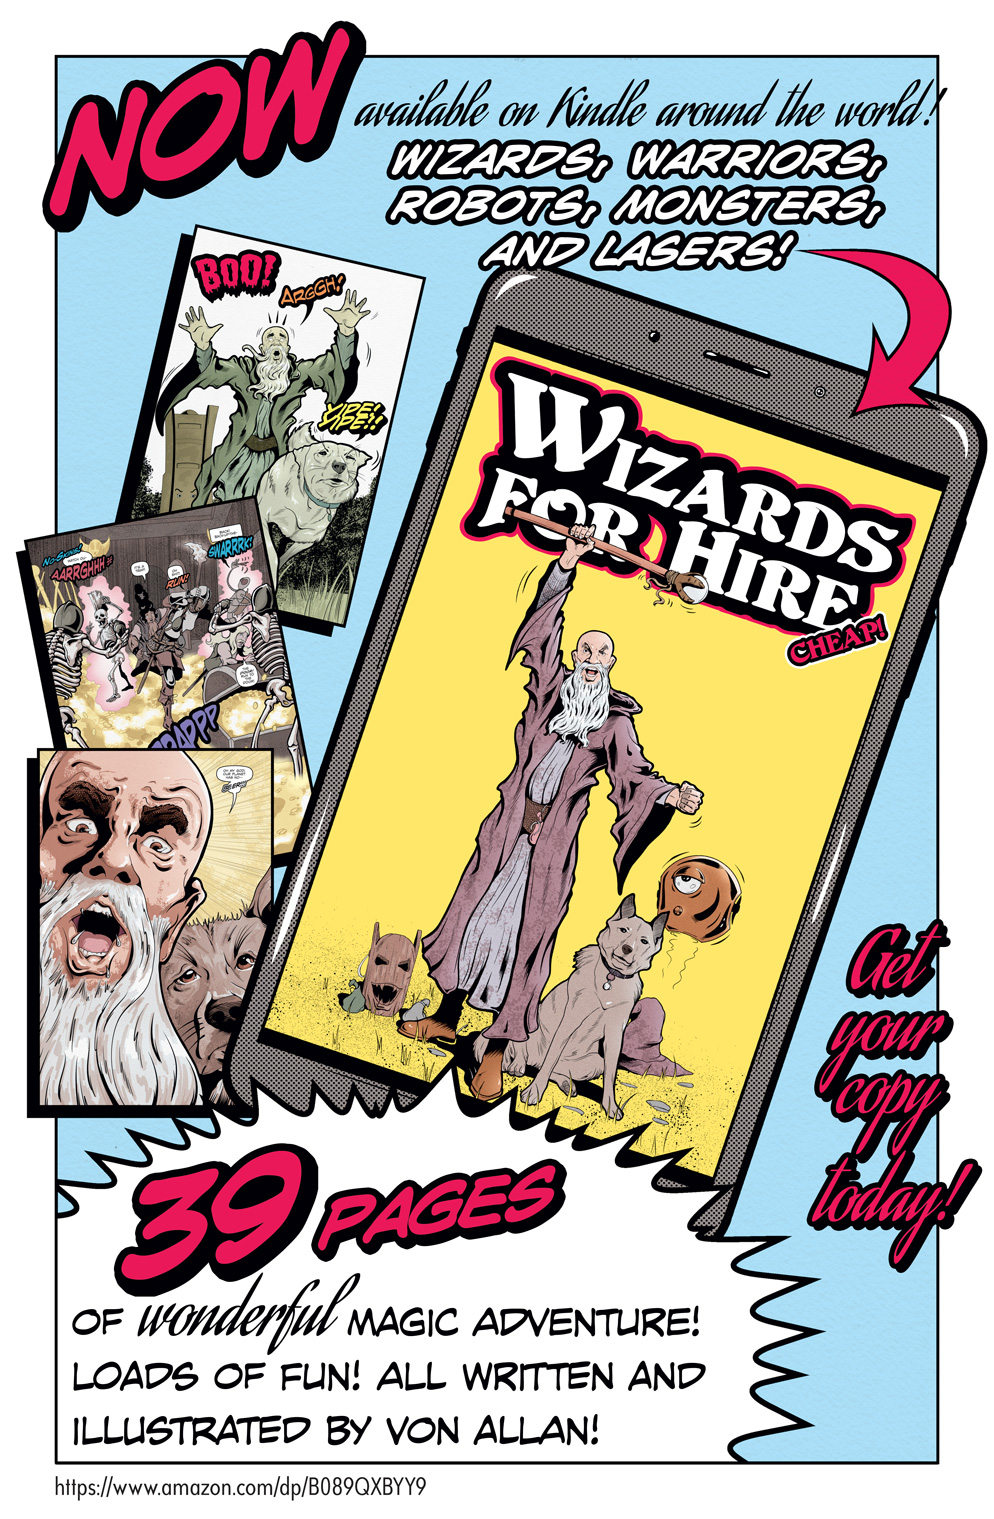 Teaser image for the Wizards for Hire - Cheap! by Von Allan